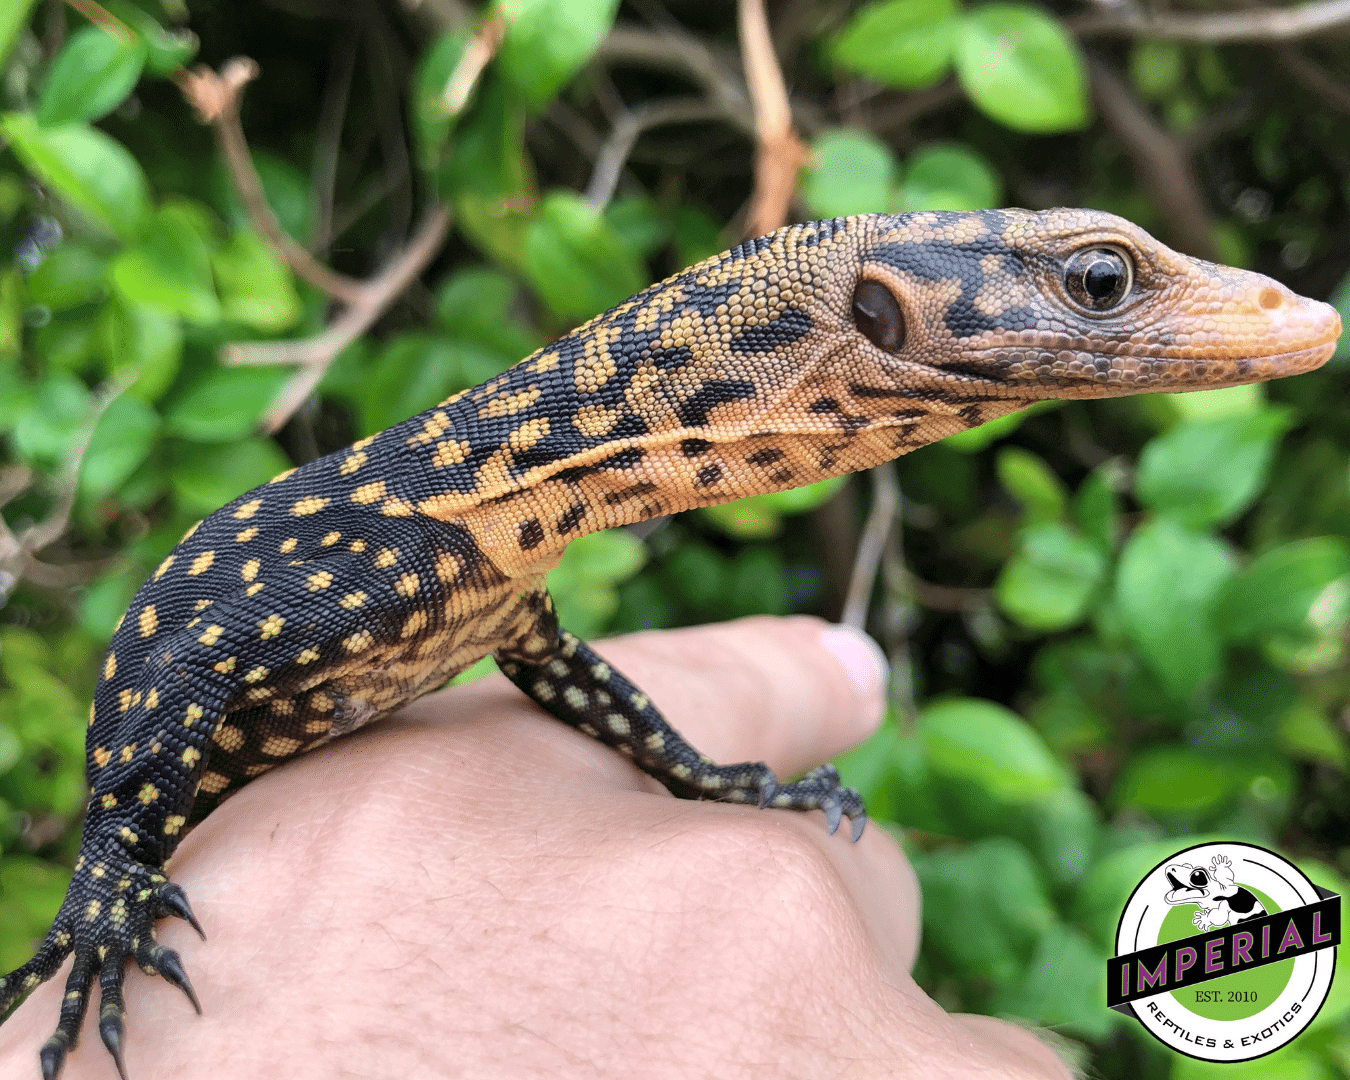 quince monitor lizard for sale, buy reptiles online